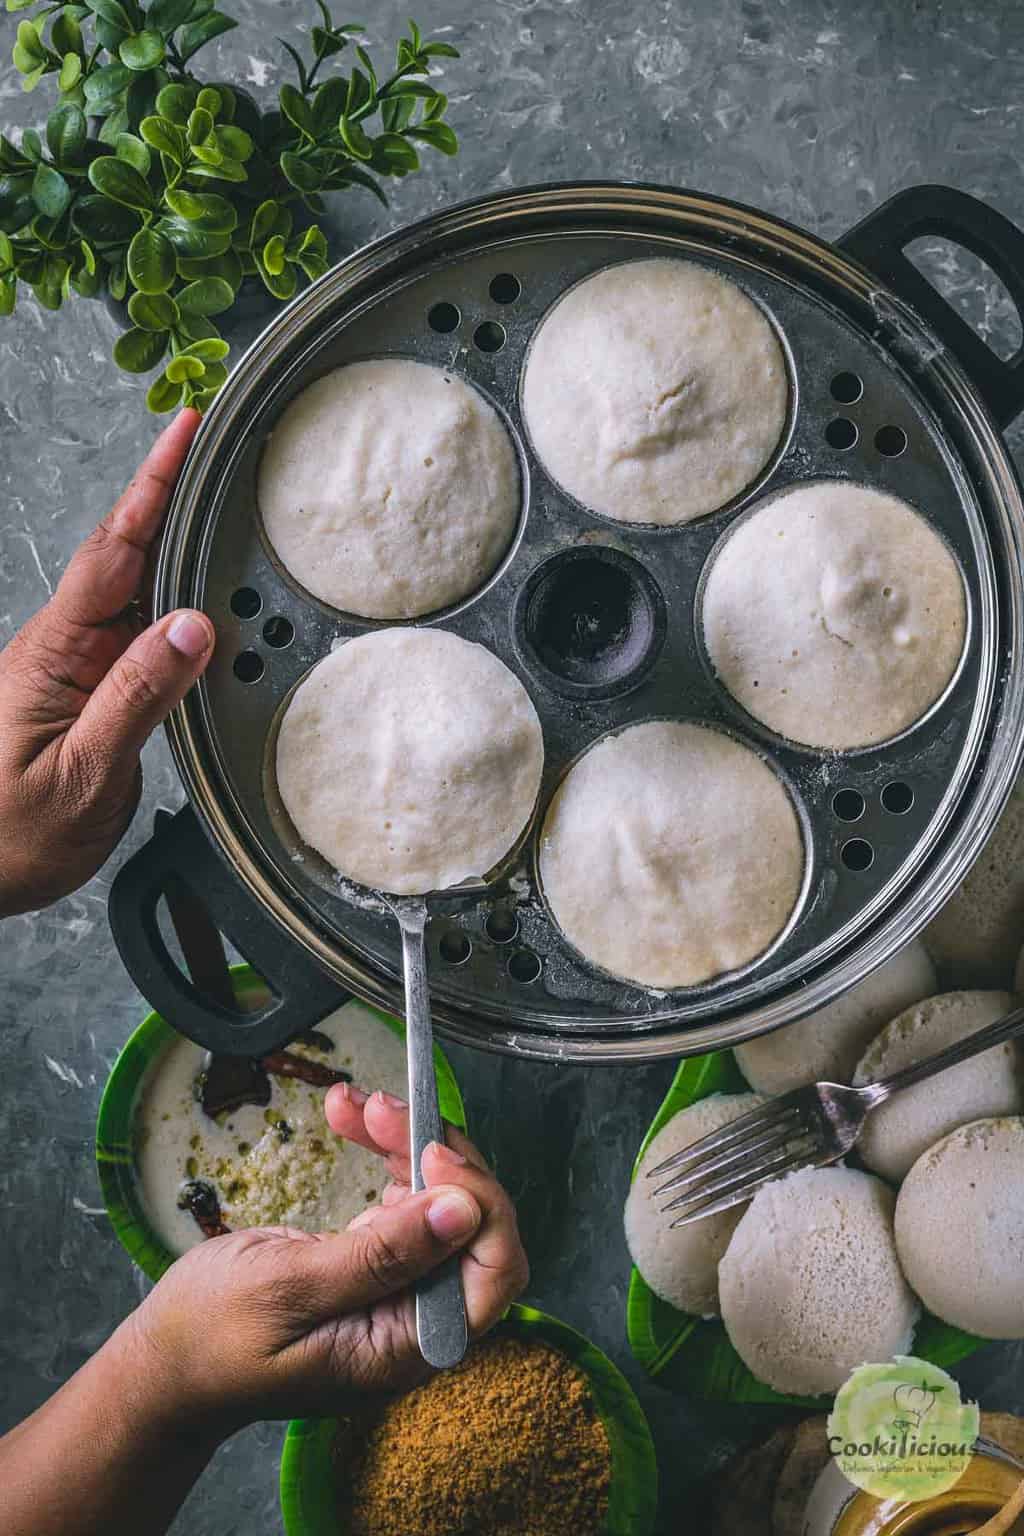 a pair of hands removing idlis from the cooker using a spoon